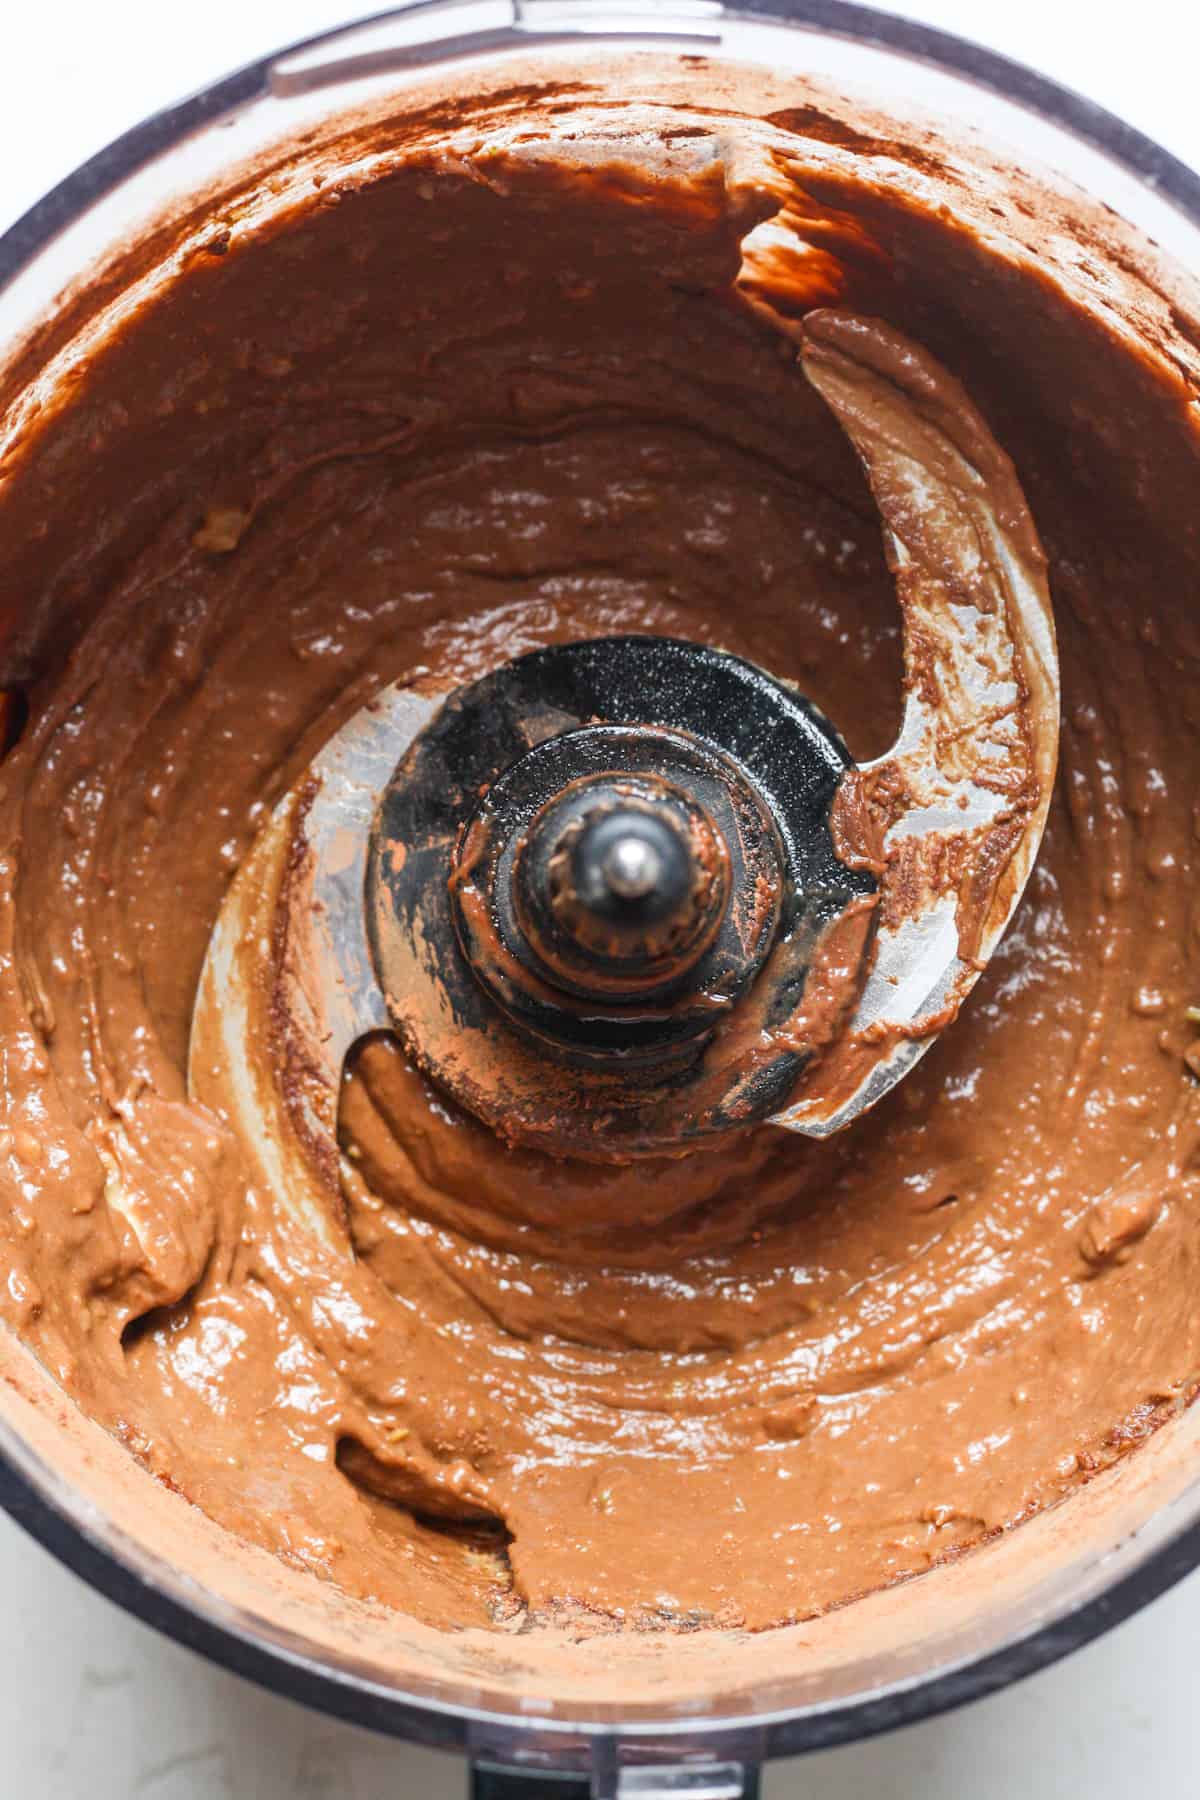 Creamy chocolate pudding in food processor.